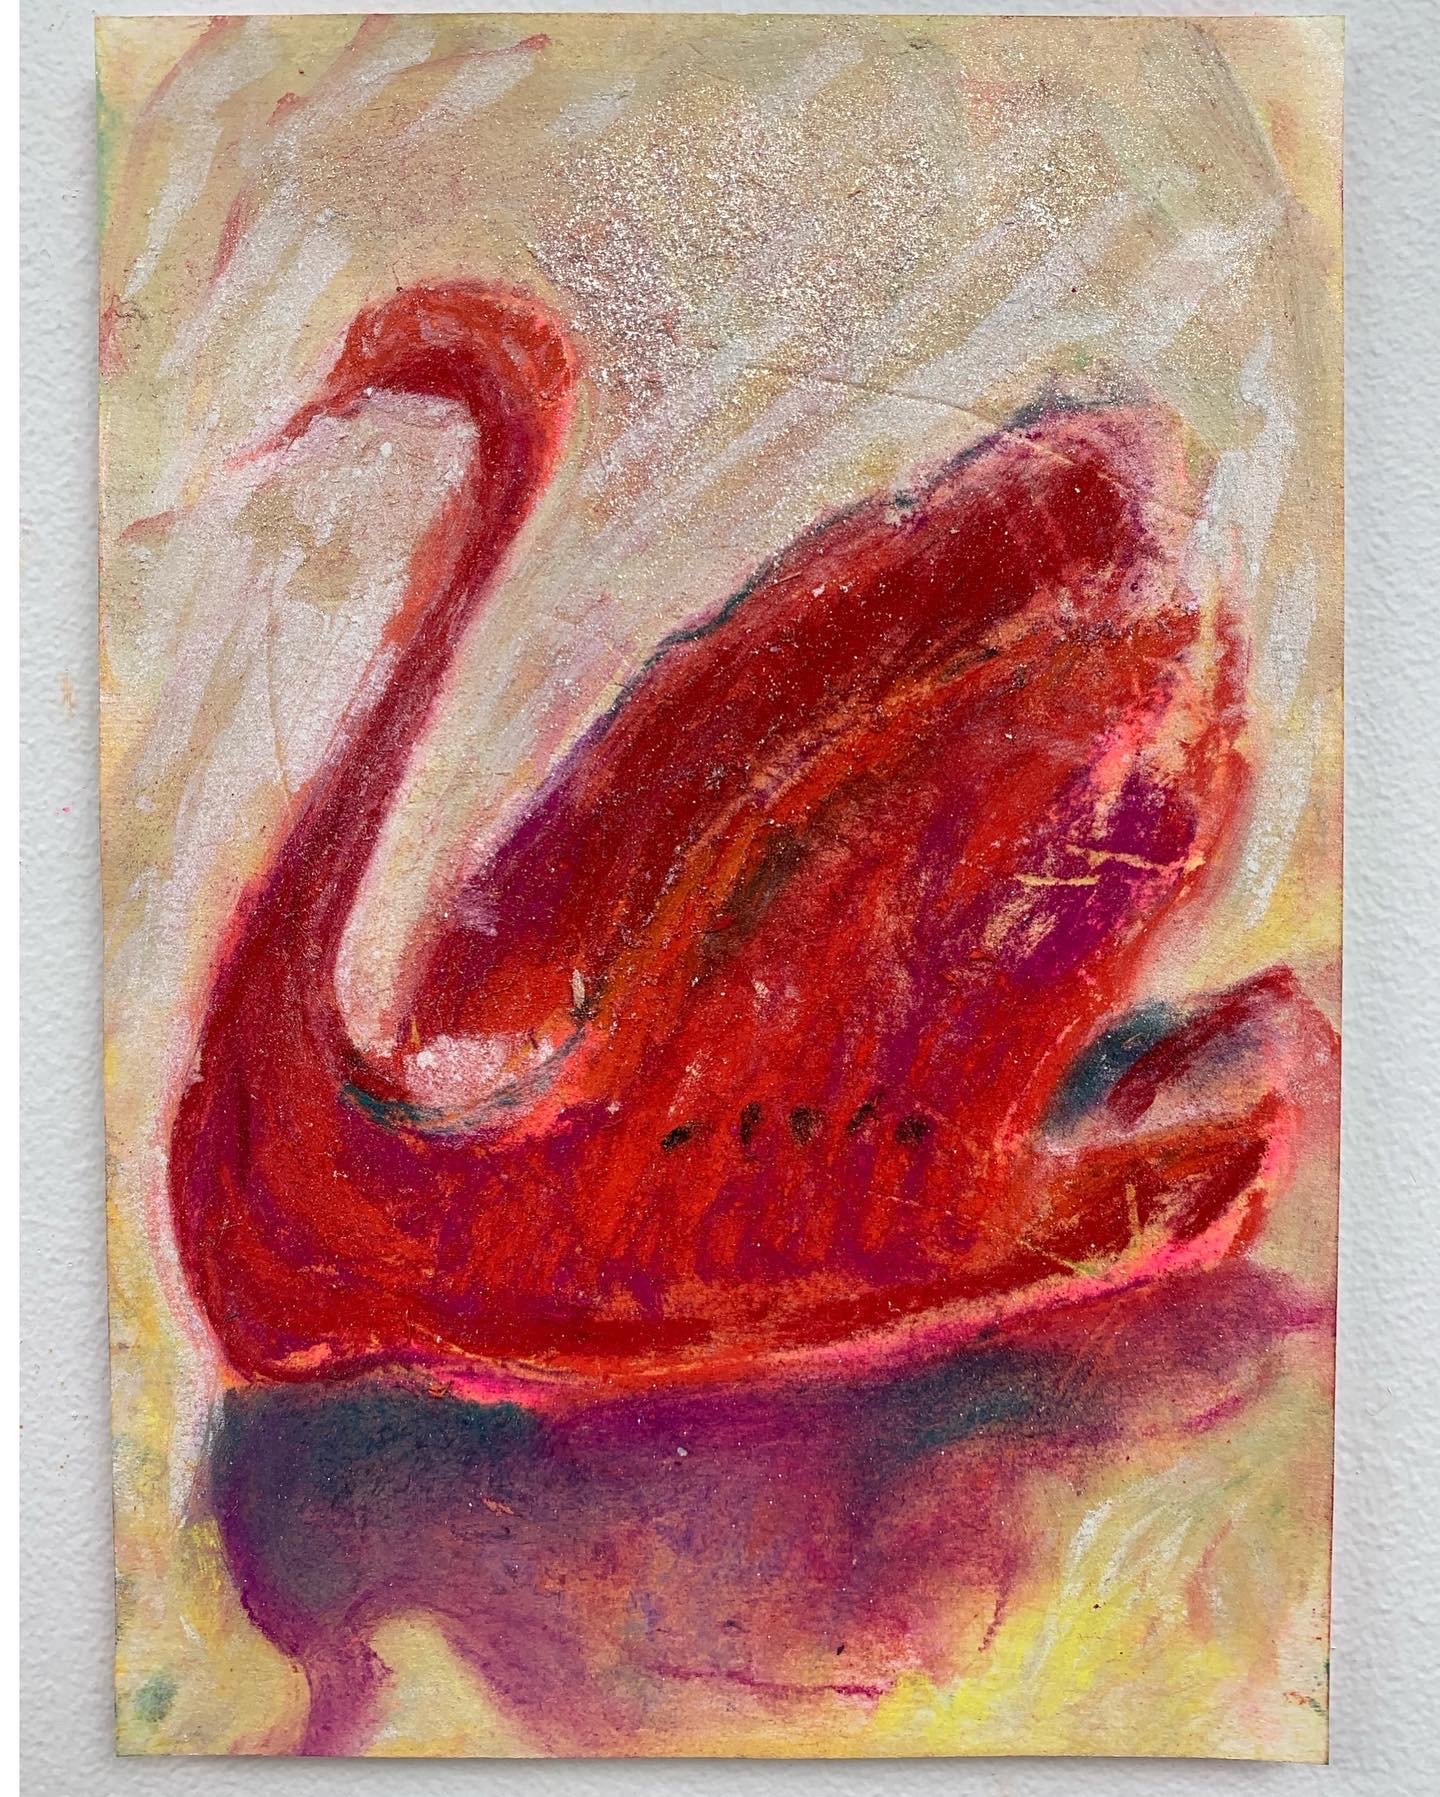  Red Swan Sharpener, 2022  soft pastel, oil pastel, and dry pigment on paper  7 x 5 inches 